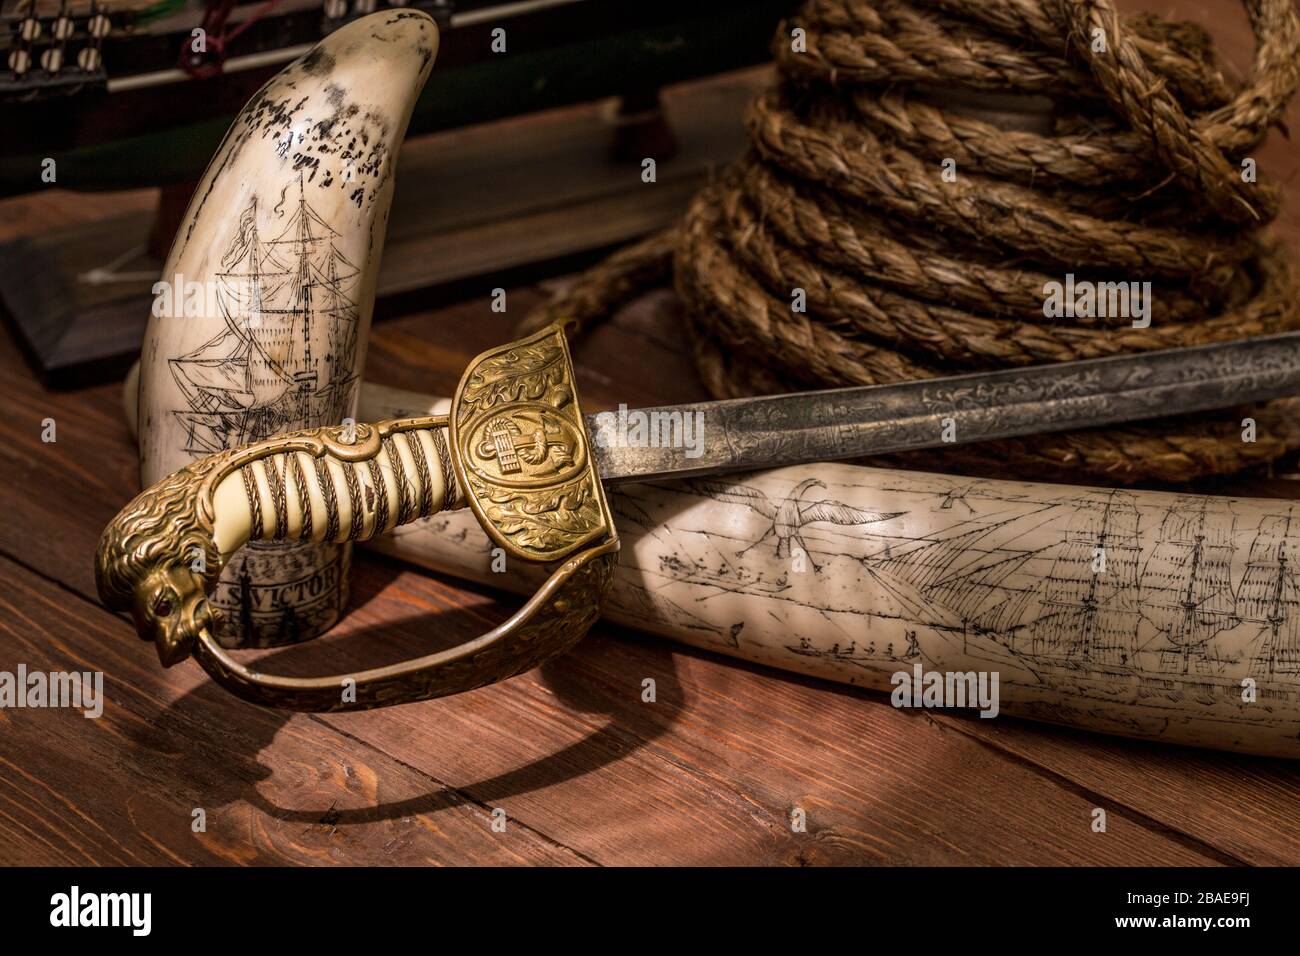 Stlll life of the 19th century sea voyage with an etching on a walrus tusk, rope and English naval sabre Stock Photo